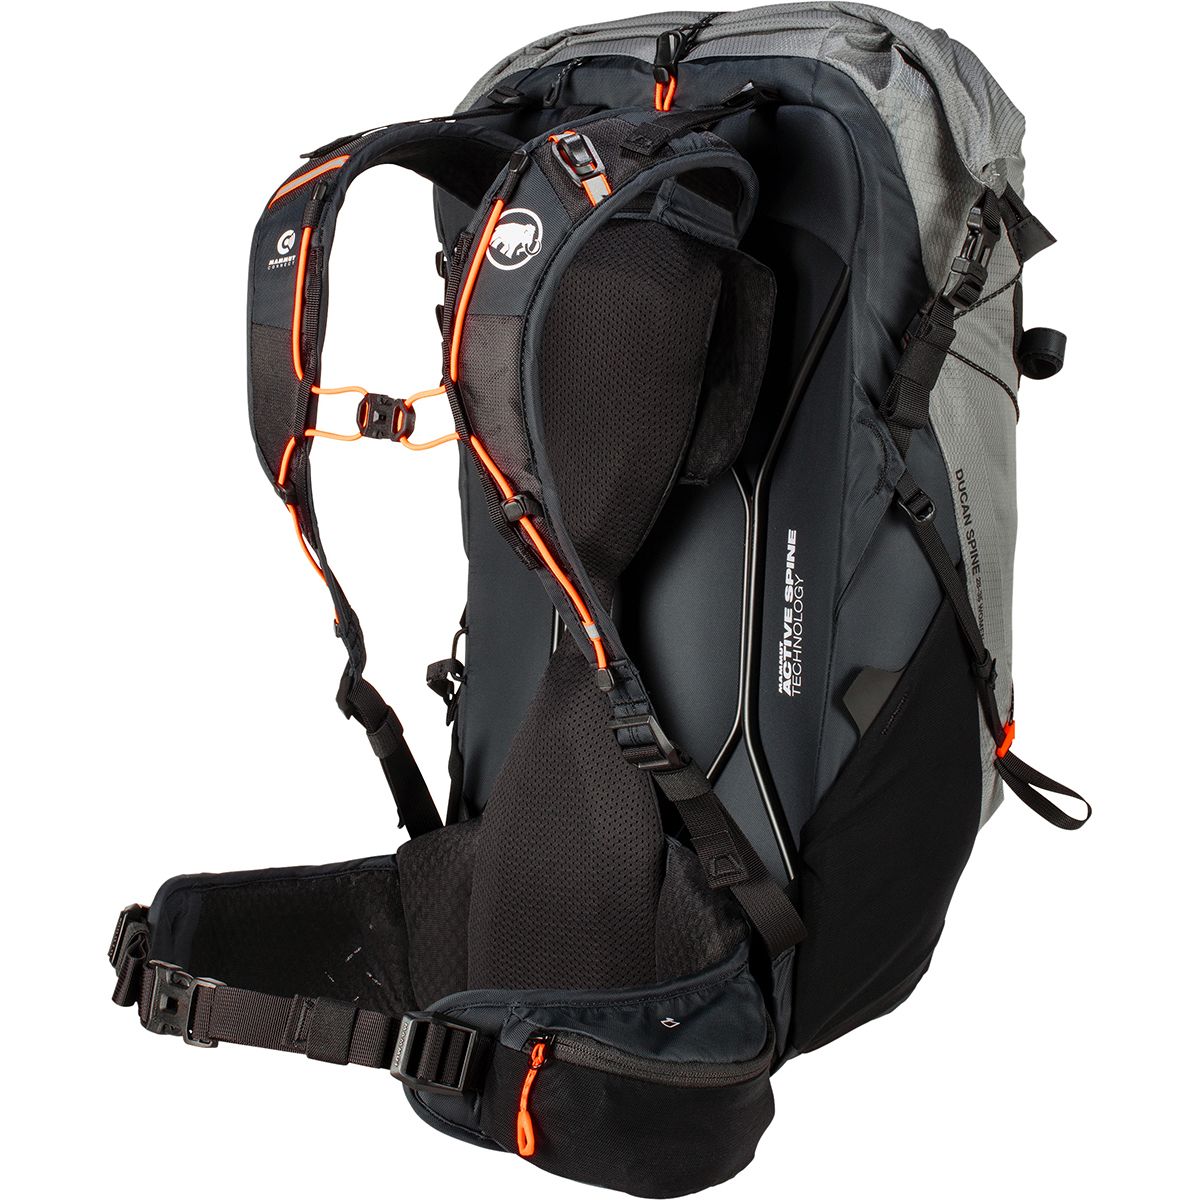 Mammut Ducan Spine 28-35L Backpack - Women's - Hike & Camp